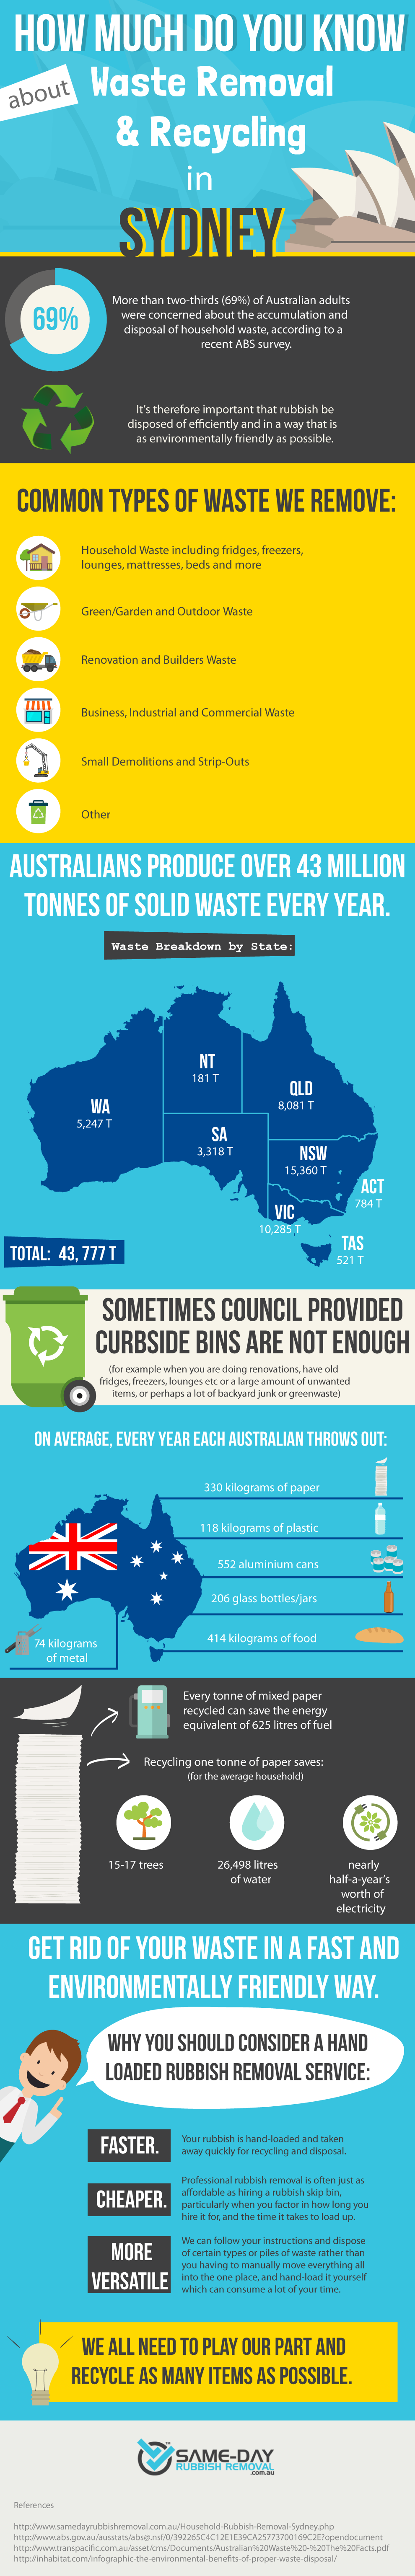 Australian Waste and Recycling Infographic